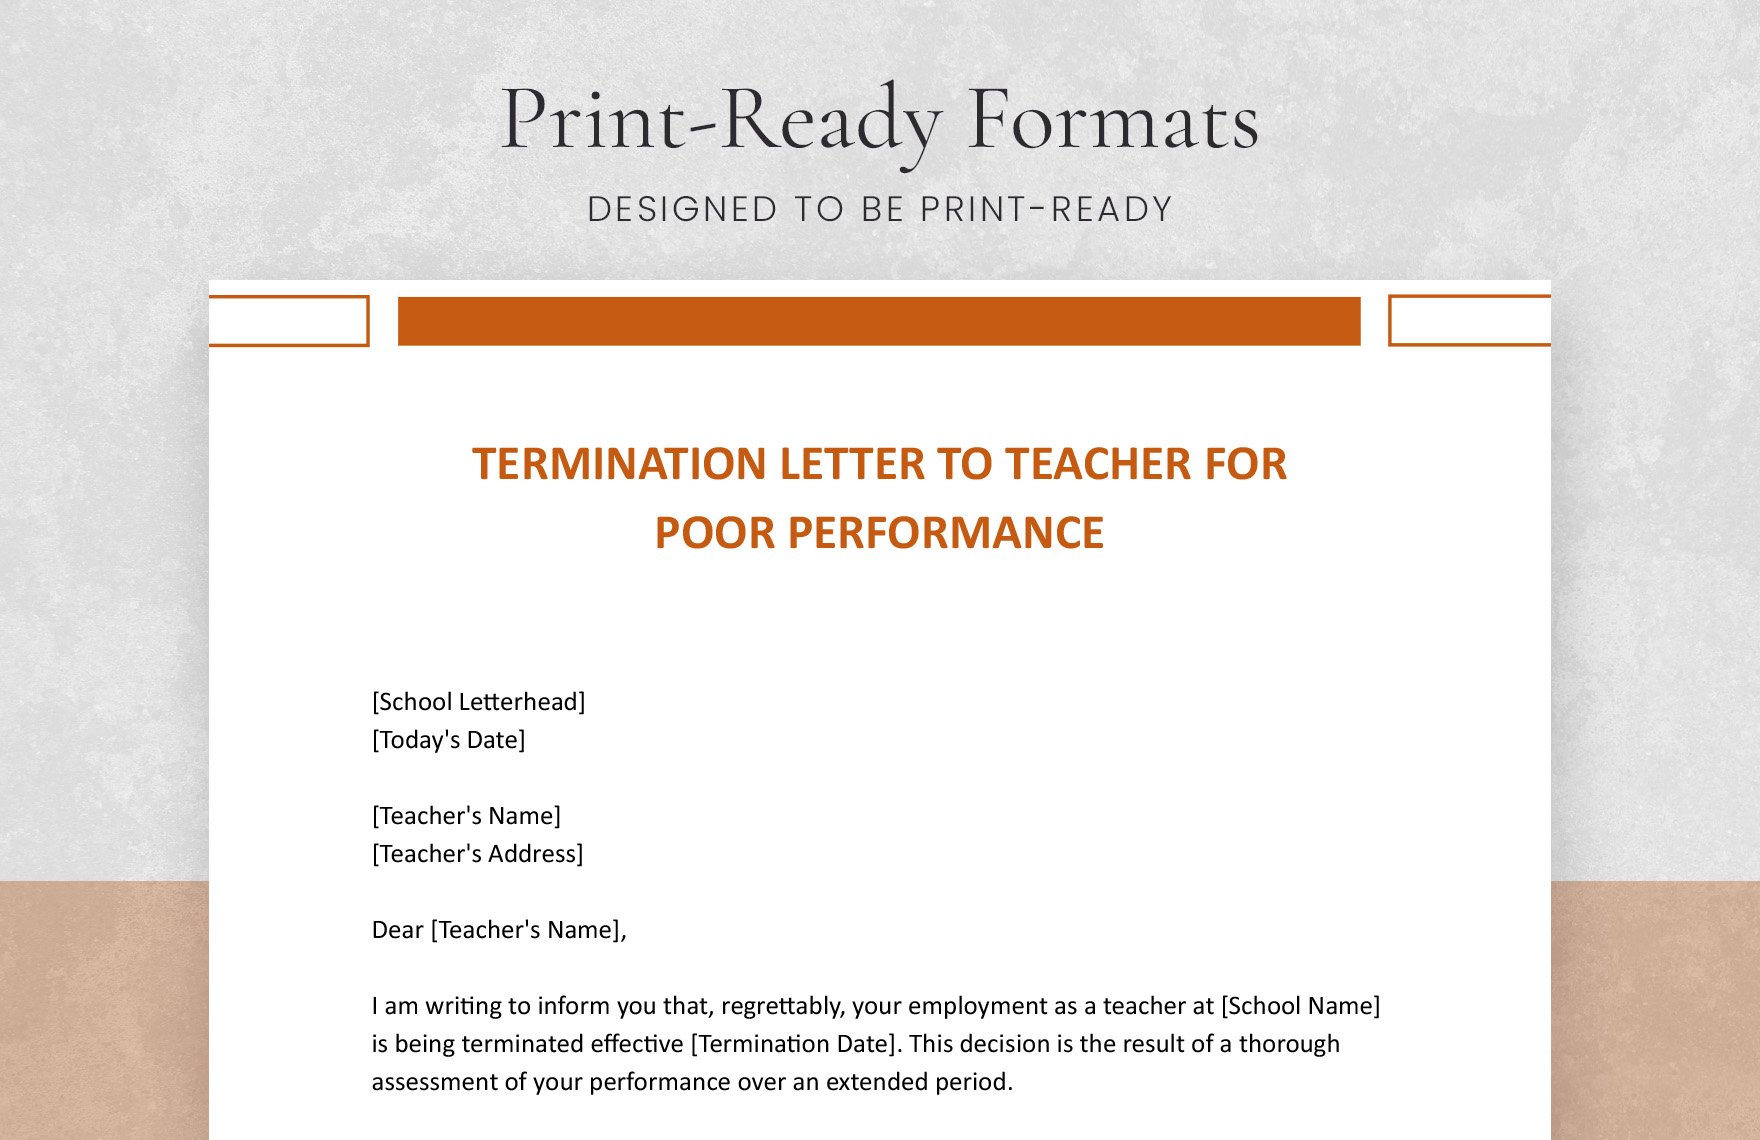 Termination Letter To Teacher For Poor Performance